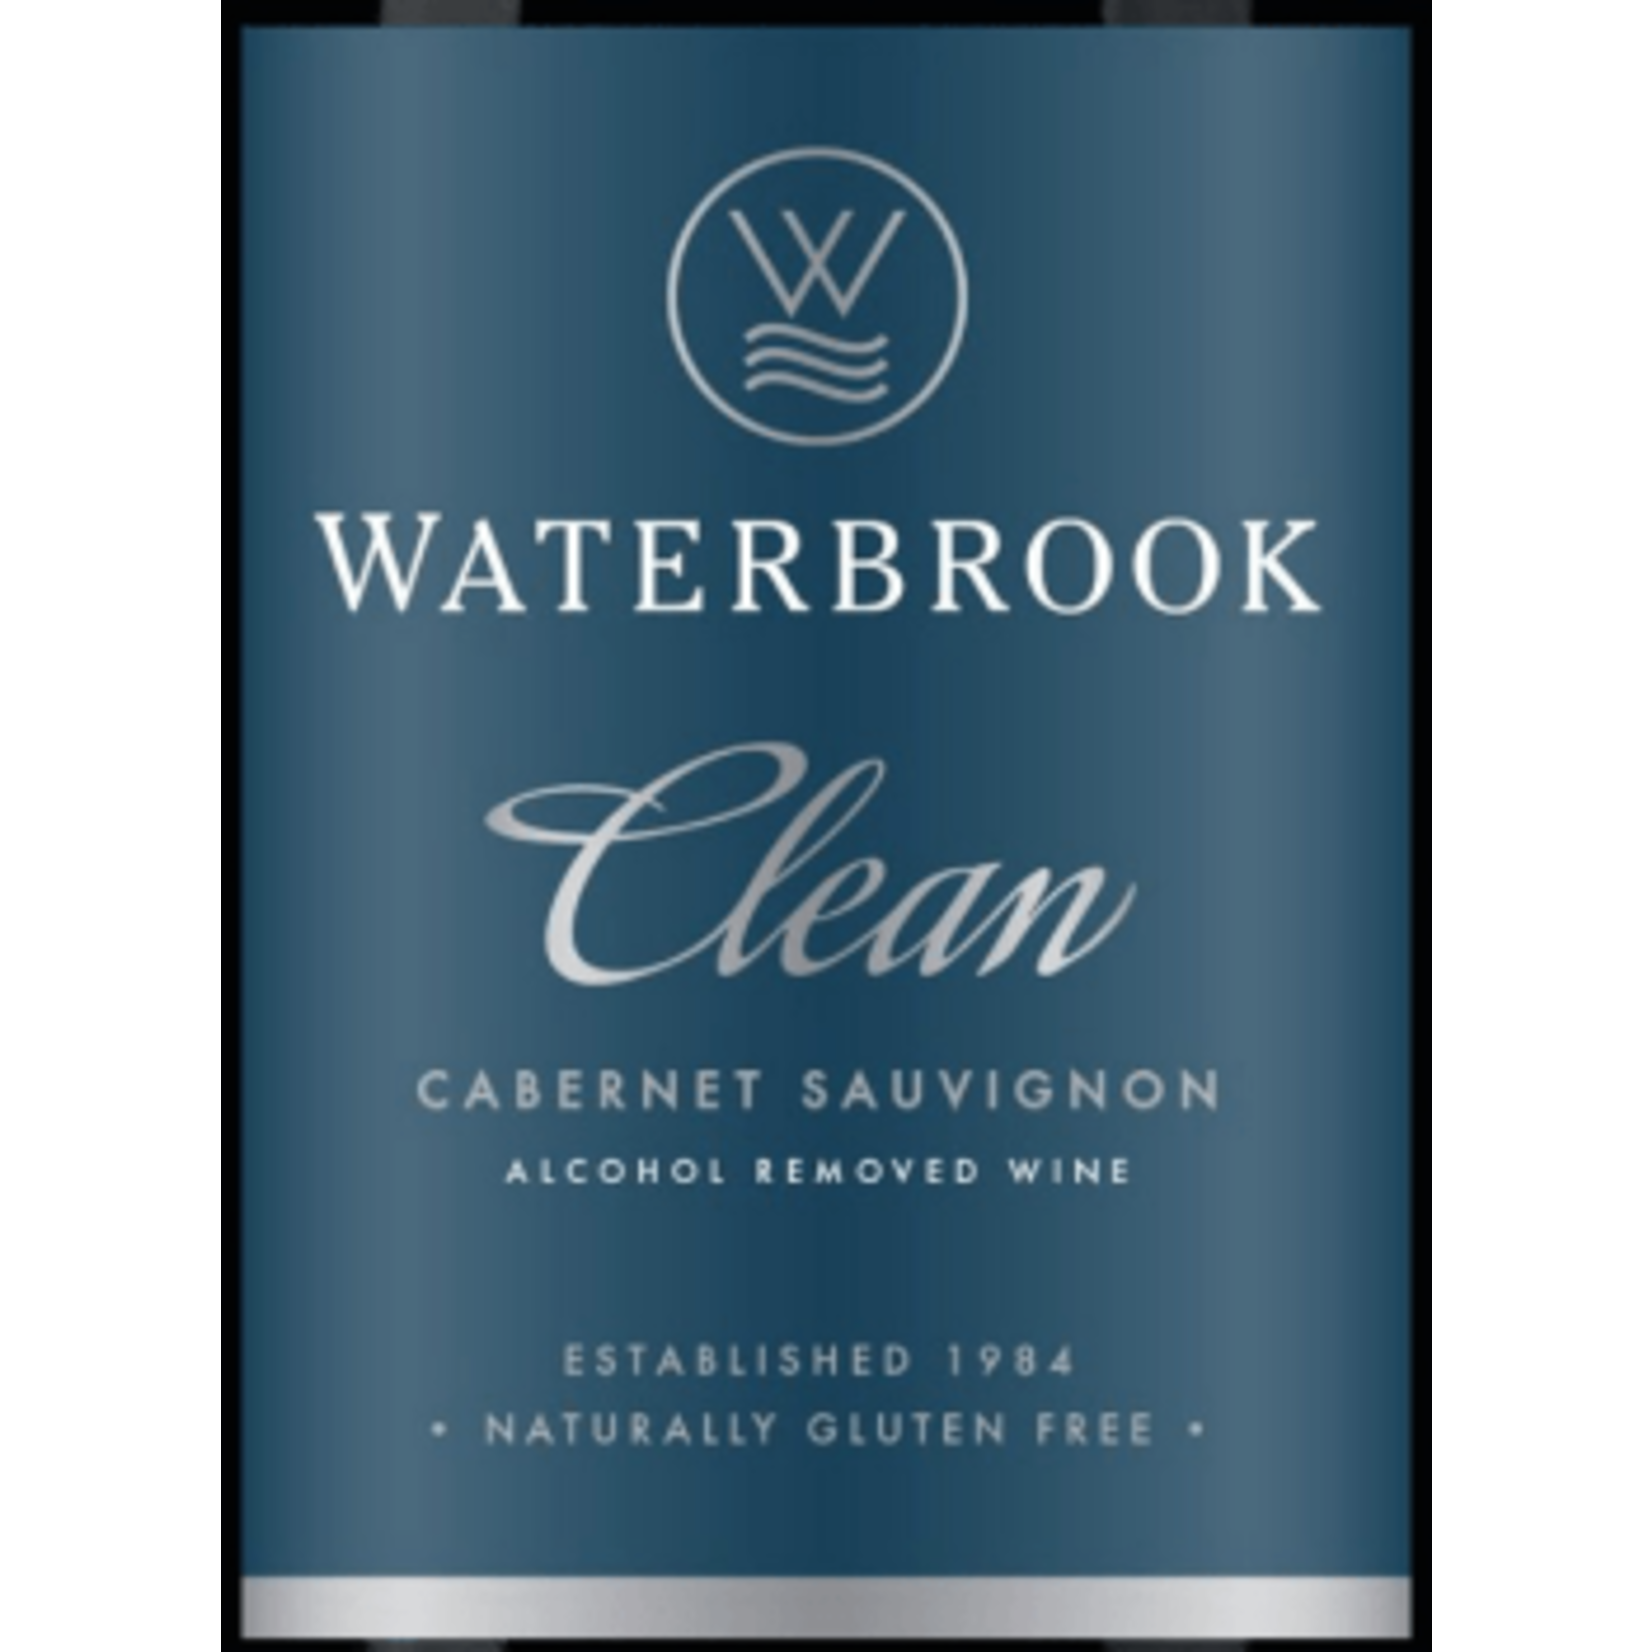 Waterbrook Waterbrook Cabernet Sauvignon Clean Alcohol Removed Wine Gluten Free NEW